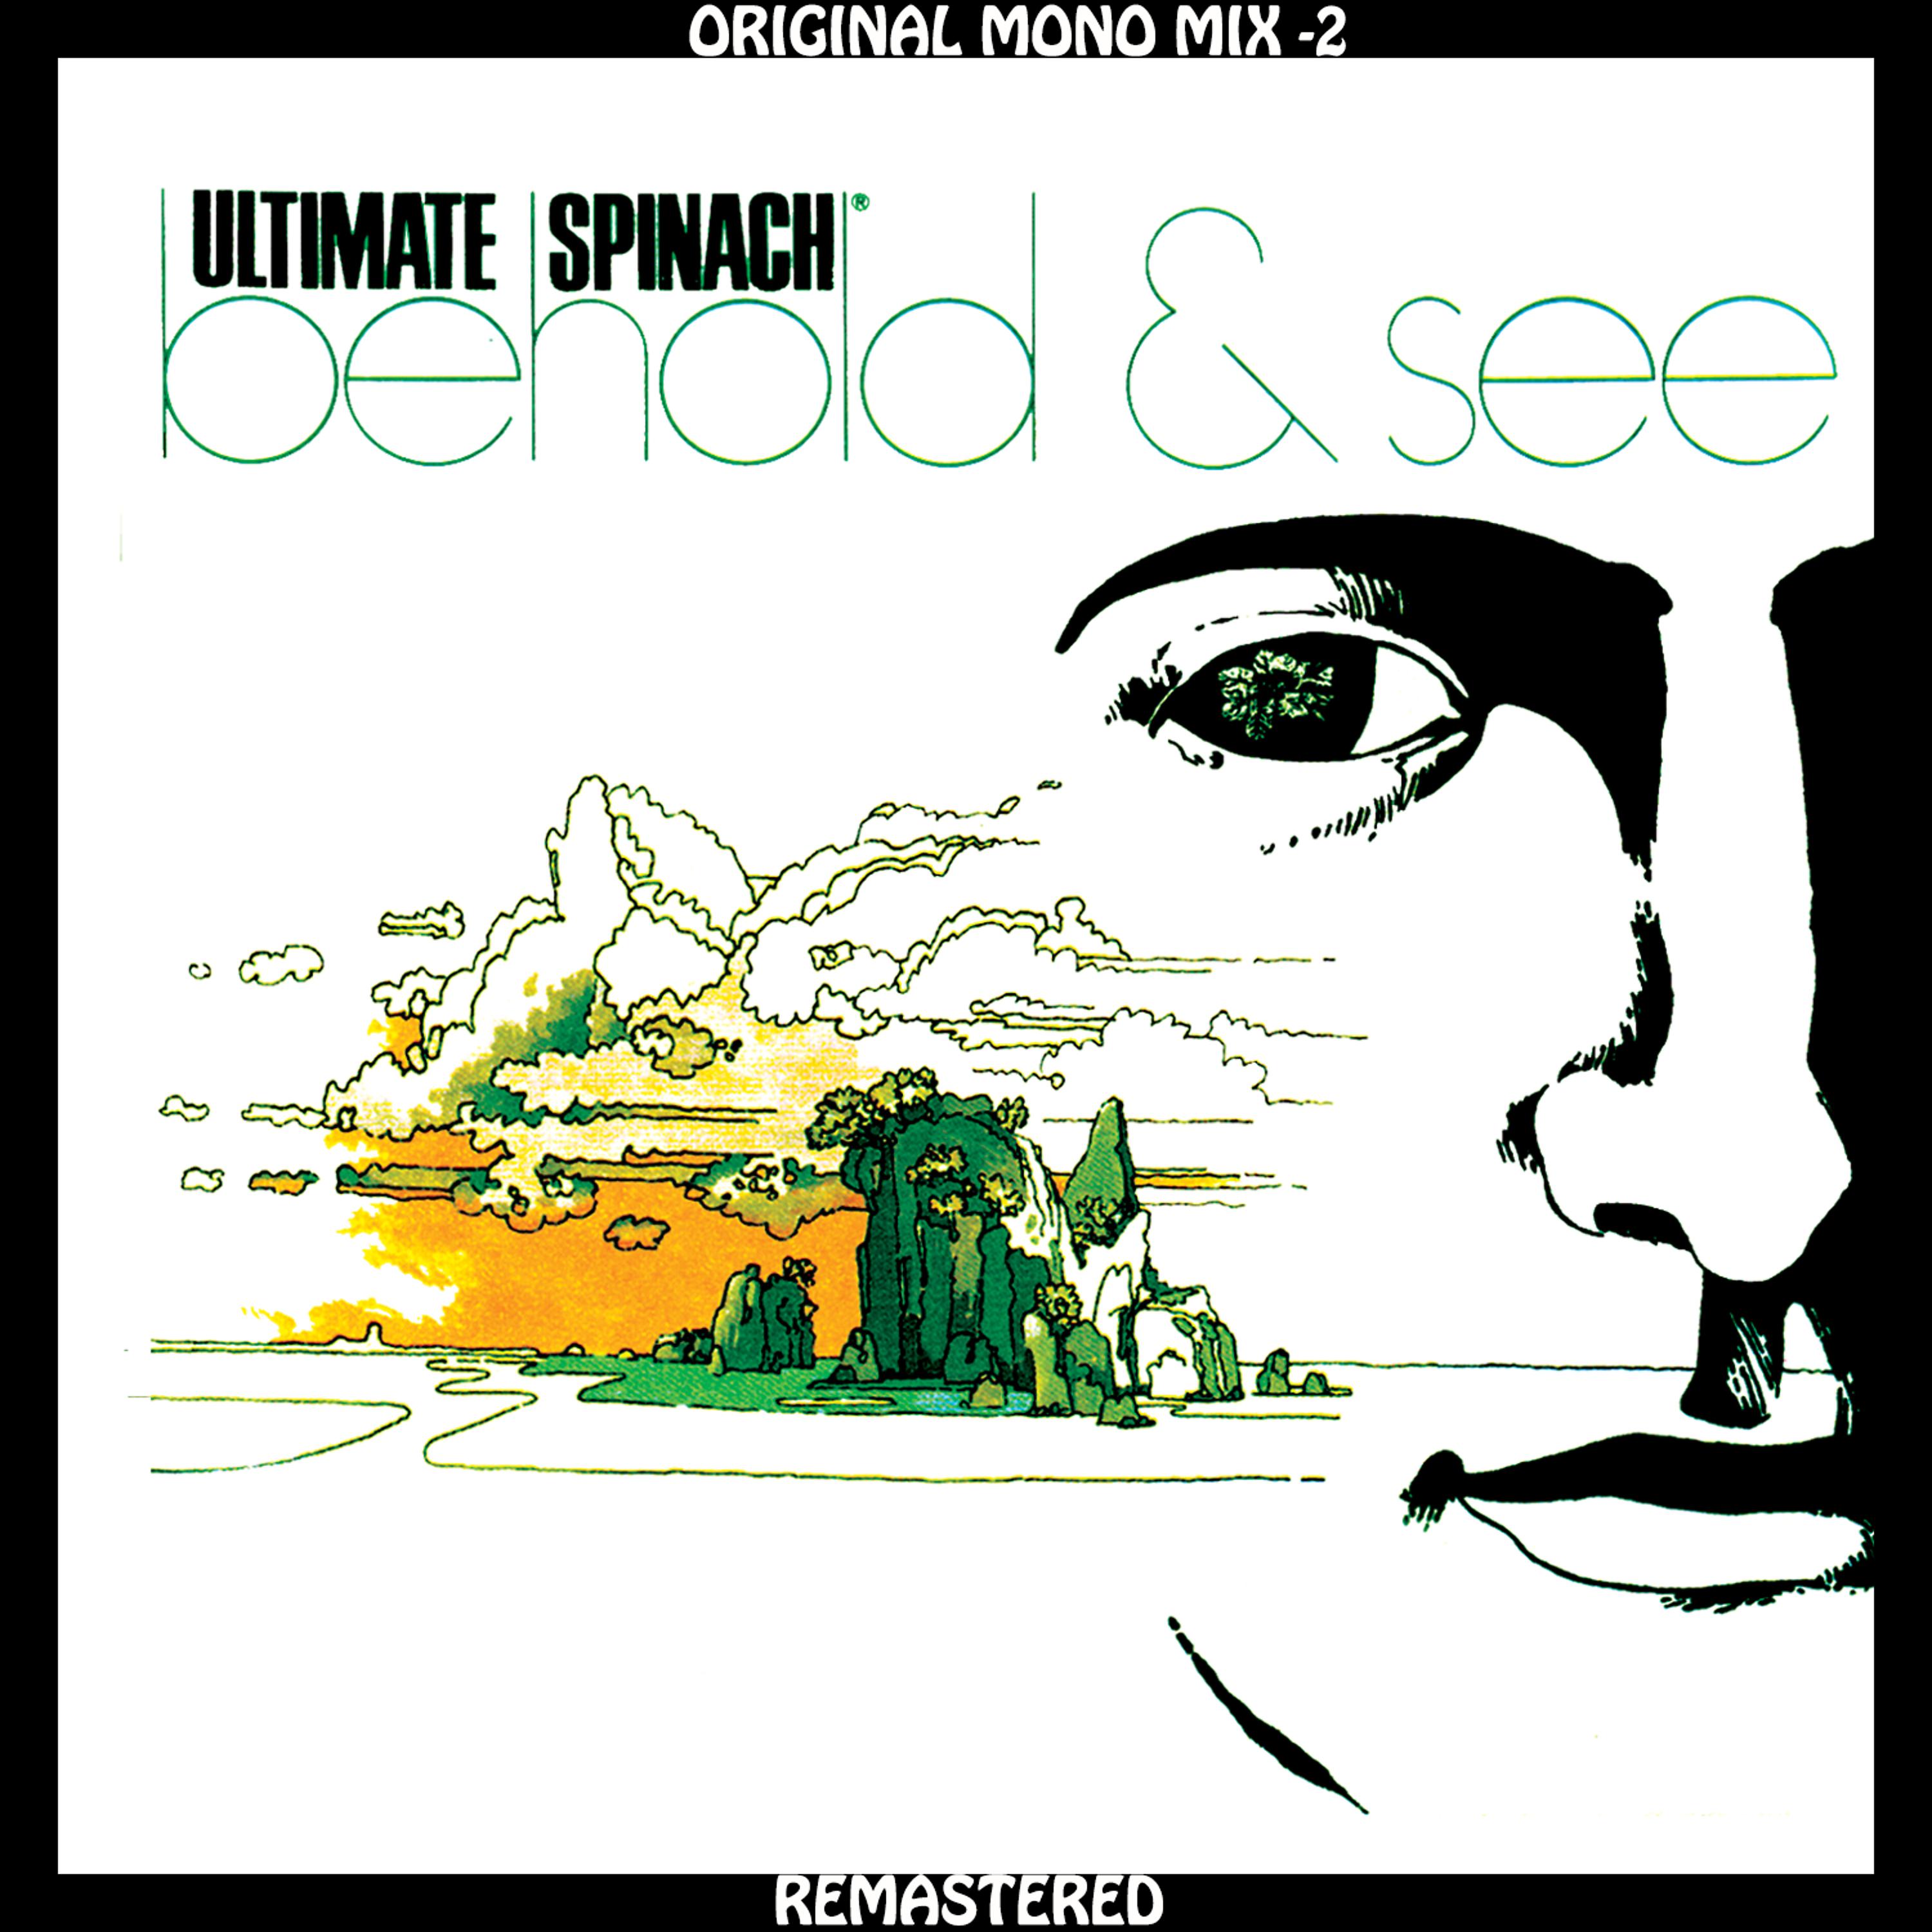 Постер альбома Ultimate Spinach - Behold & See - Original Mono Mix - 2